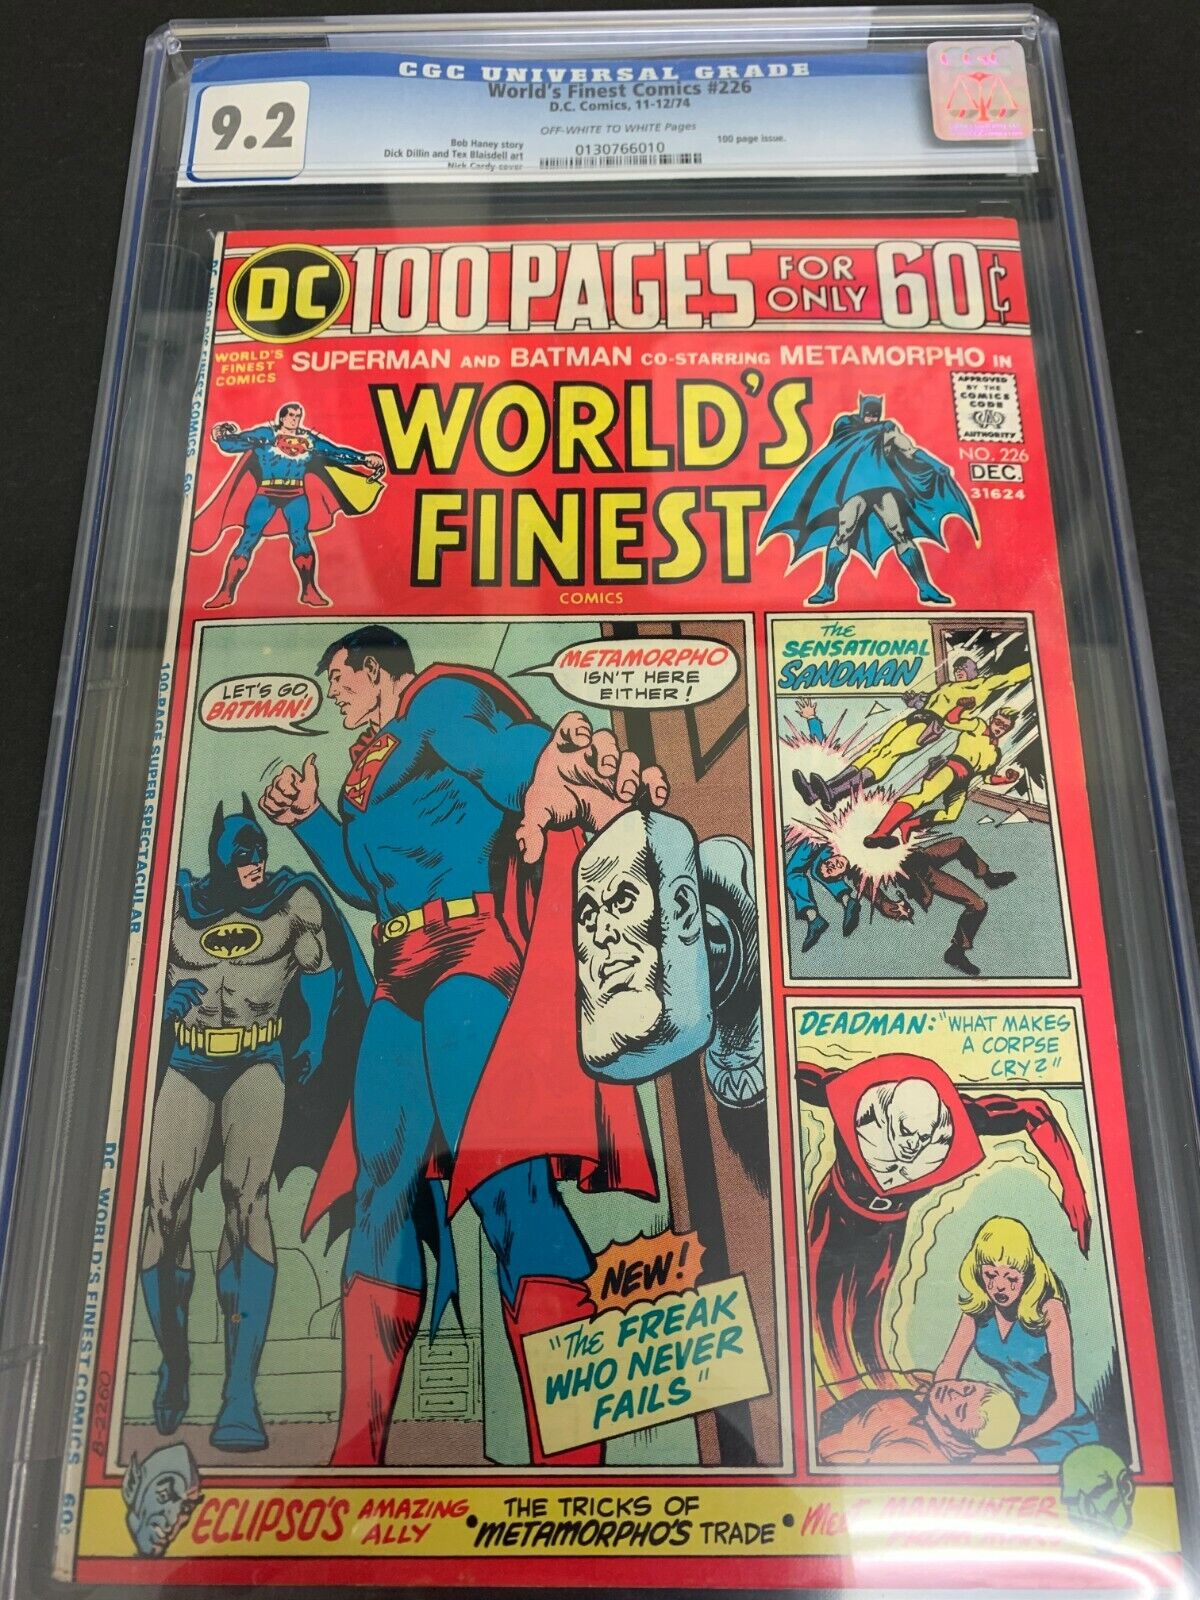 WORLD\'S FINEST COMICS #226 * CGC 9.2 * (DC, 1974) CARDY COVER  100 PAGE GIANT